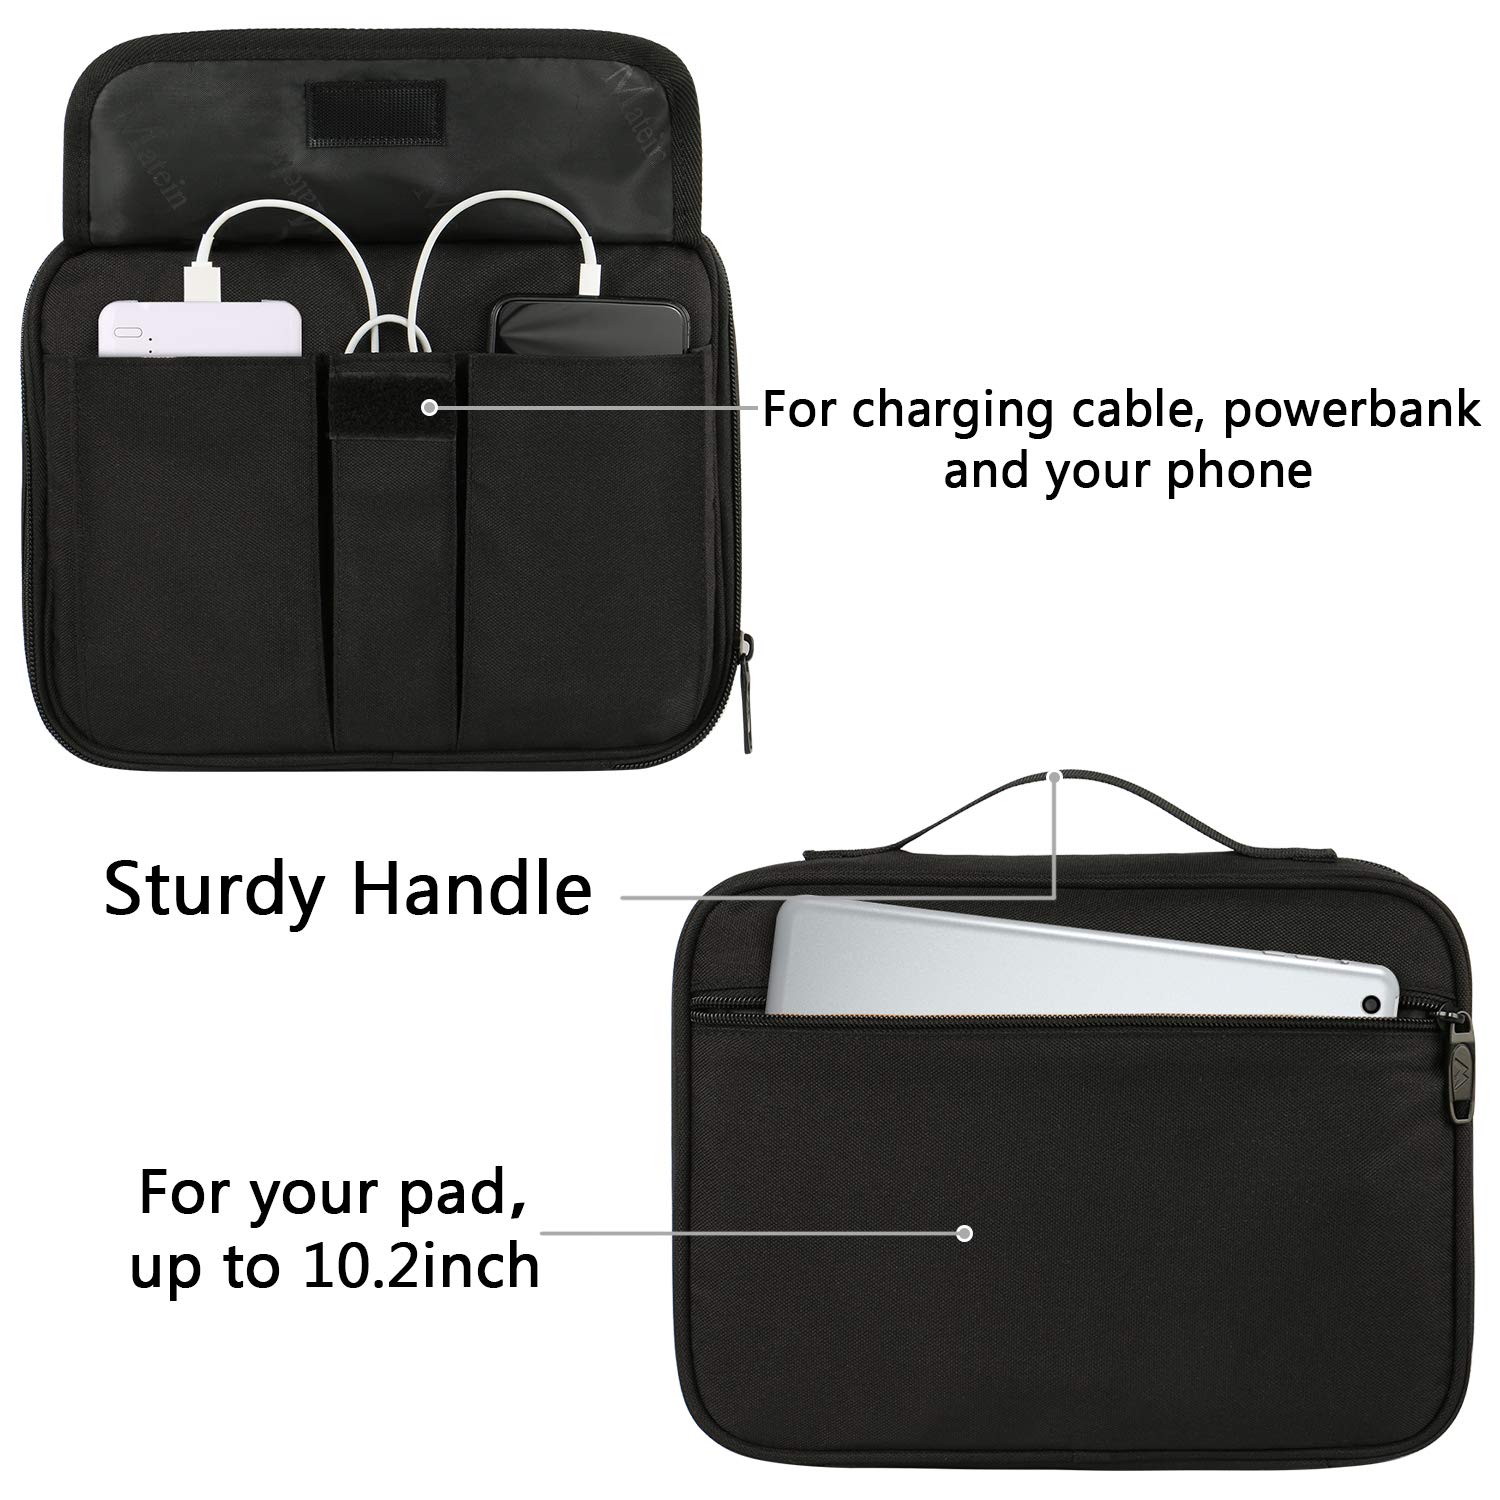 Matein Electronics Organizer, Waterproof Travel Electronic Accessories Case Portable Double Layer Cable Storage Bag for Cord, Charger, Power Bank, Flash Drive, Phone, Ipad Mini, SD Card, Tablet, Black